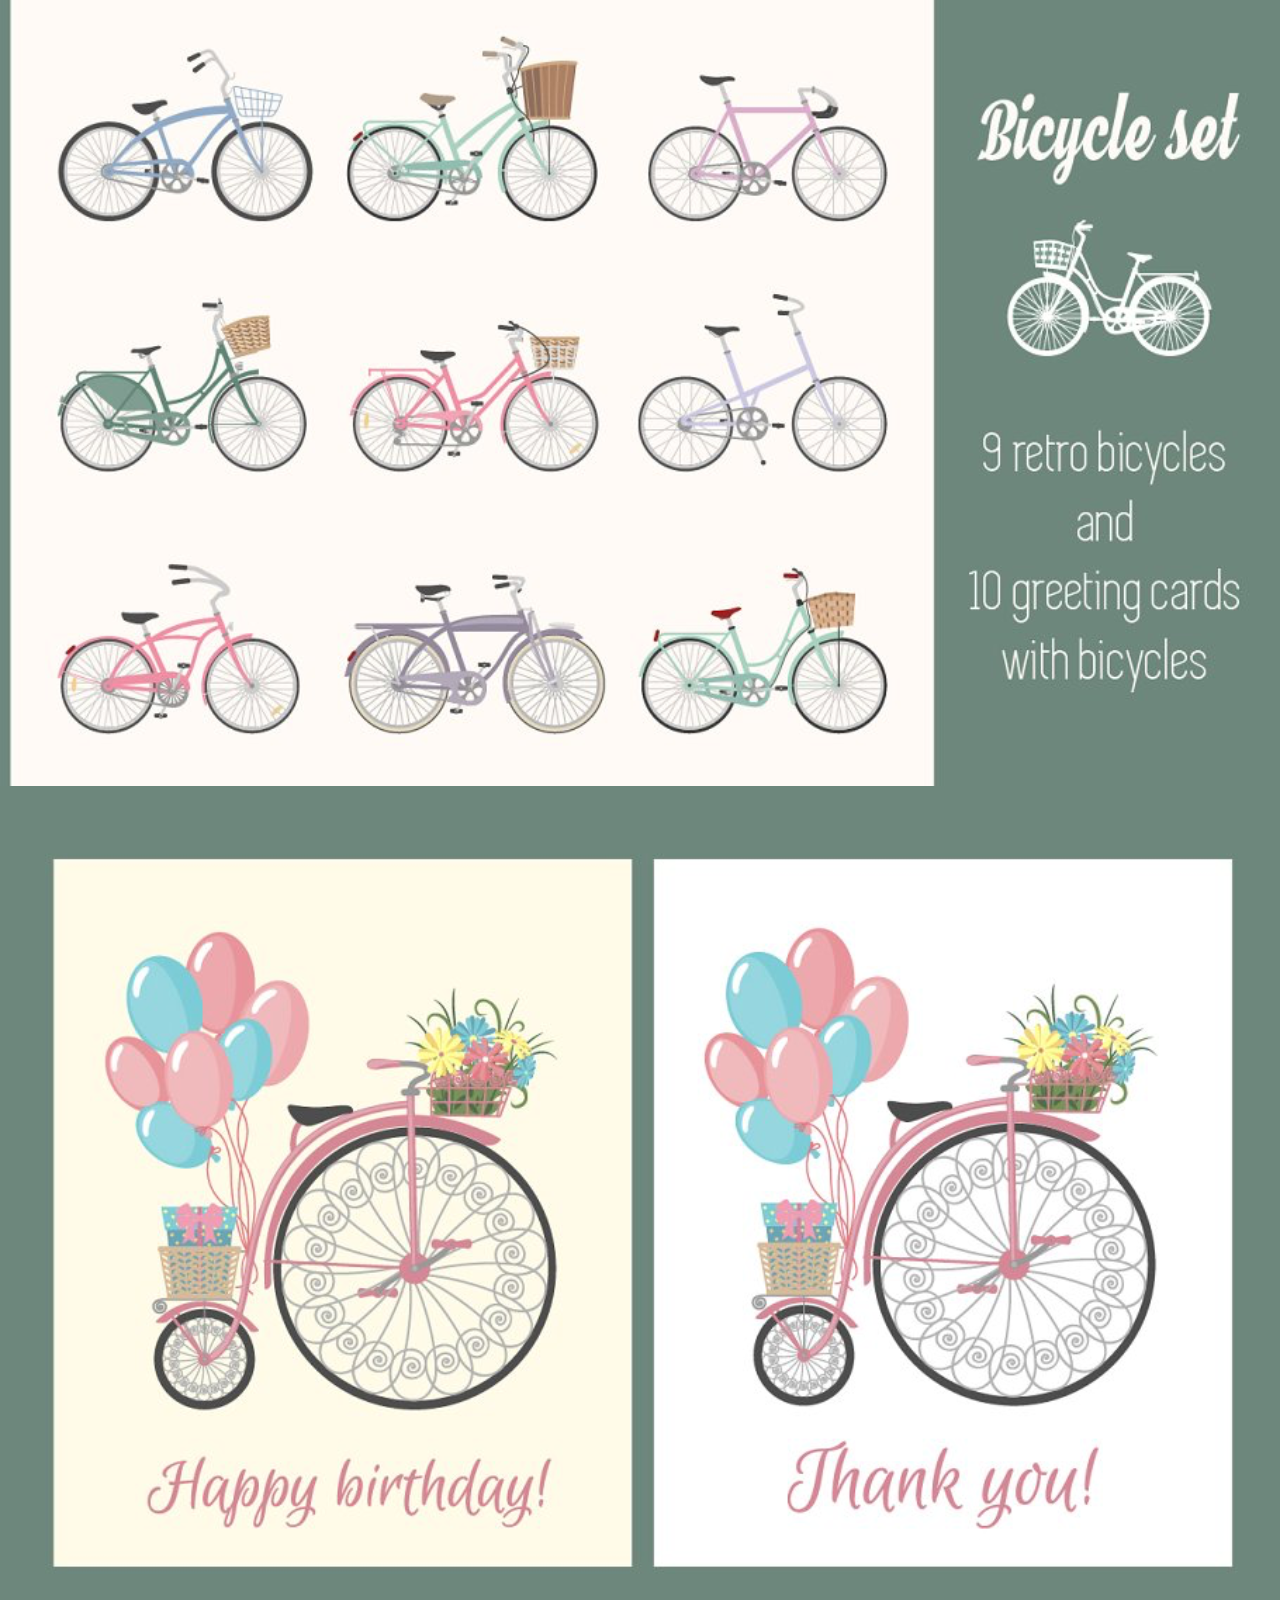 Bicycle set pinterest image preview.